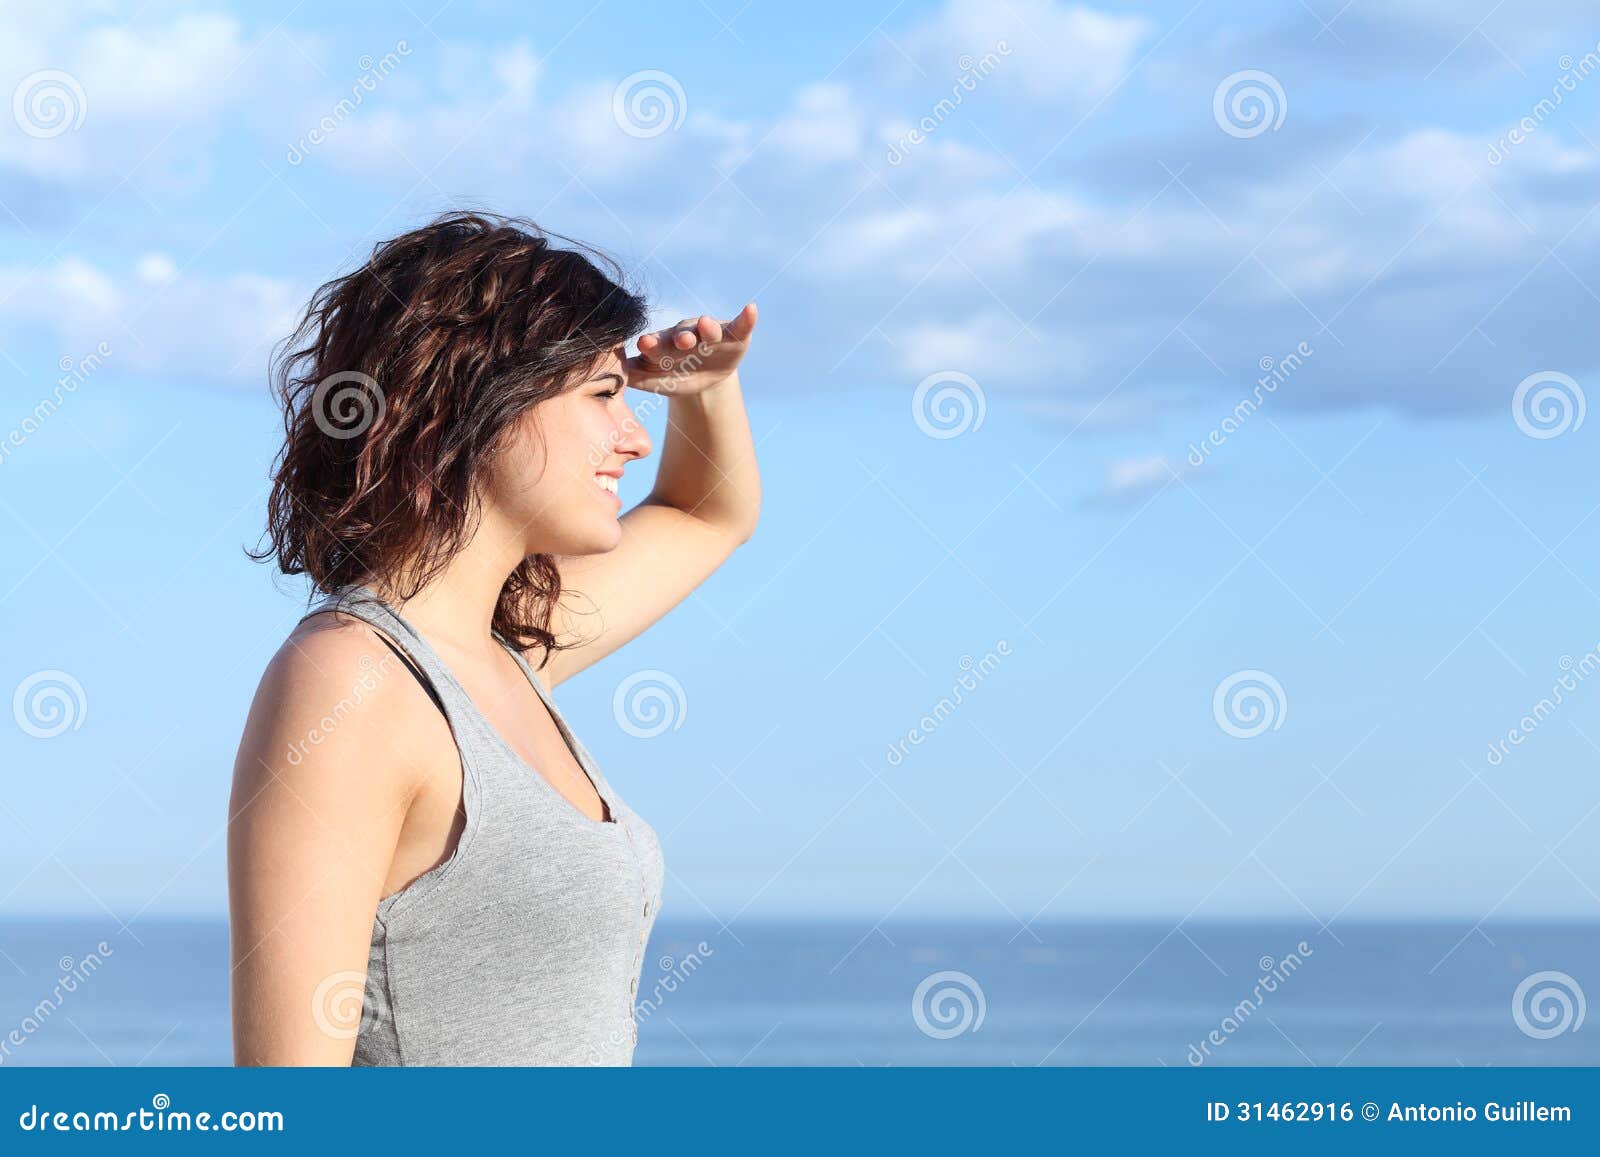 beautiful woman looking forward with the hand in forehead